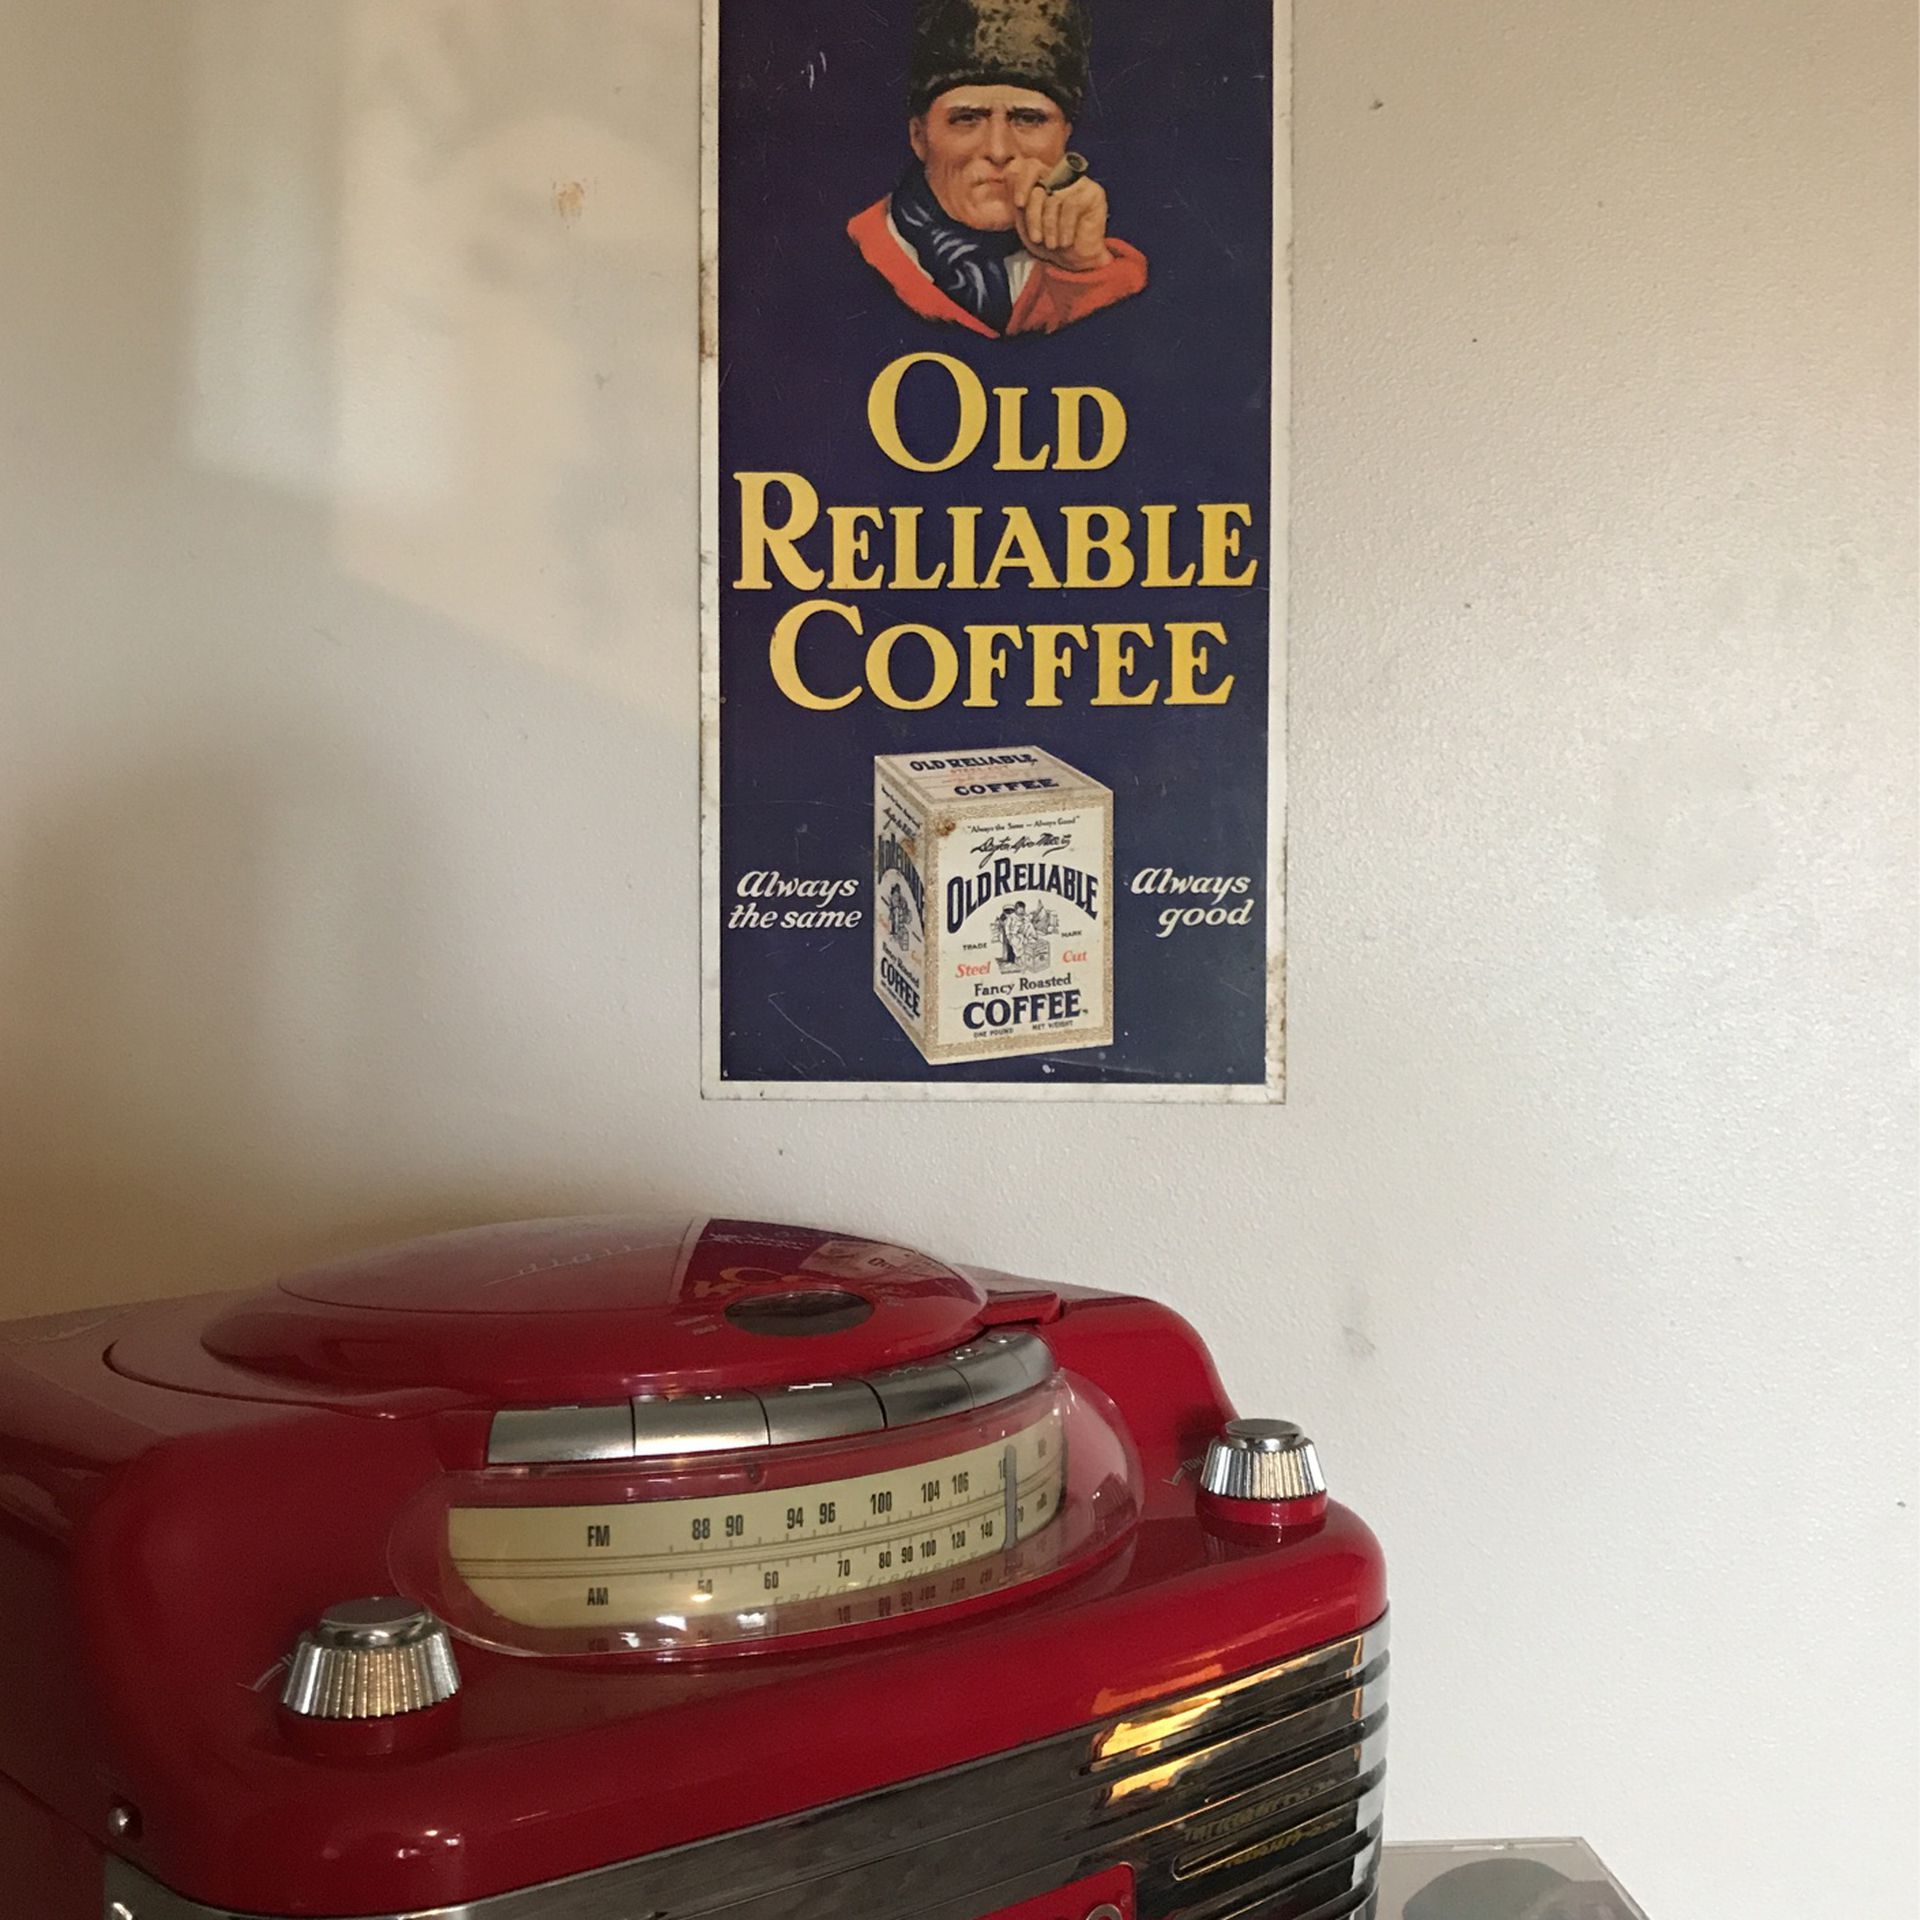 Vintage old reliable coffee advertisement sign